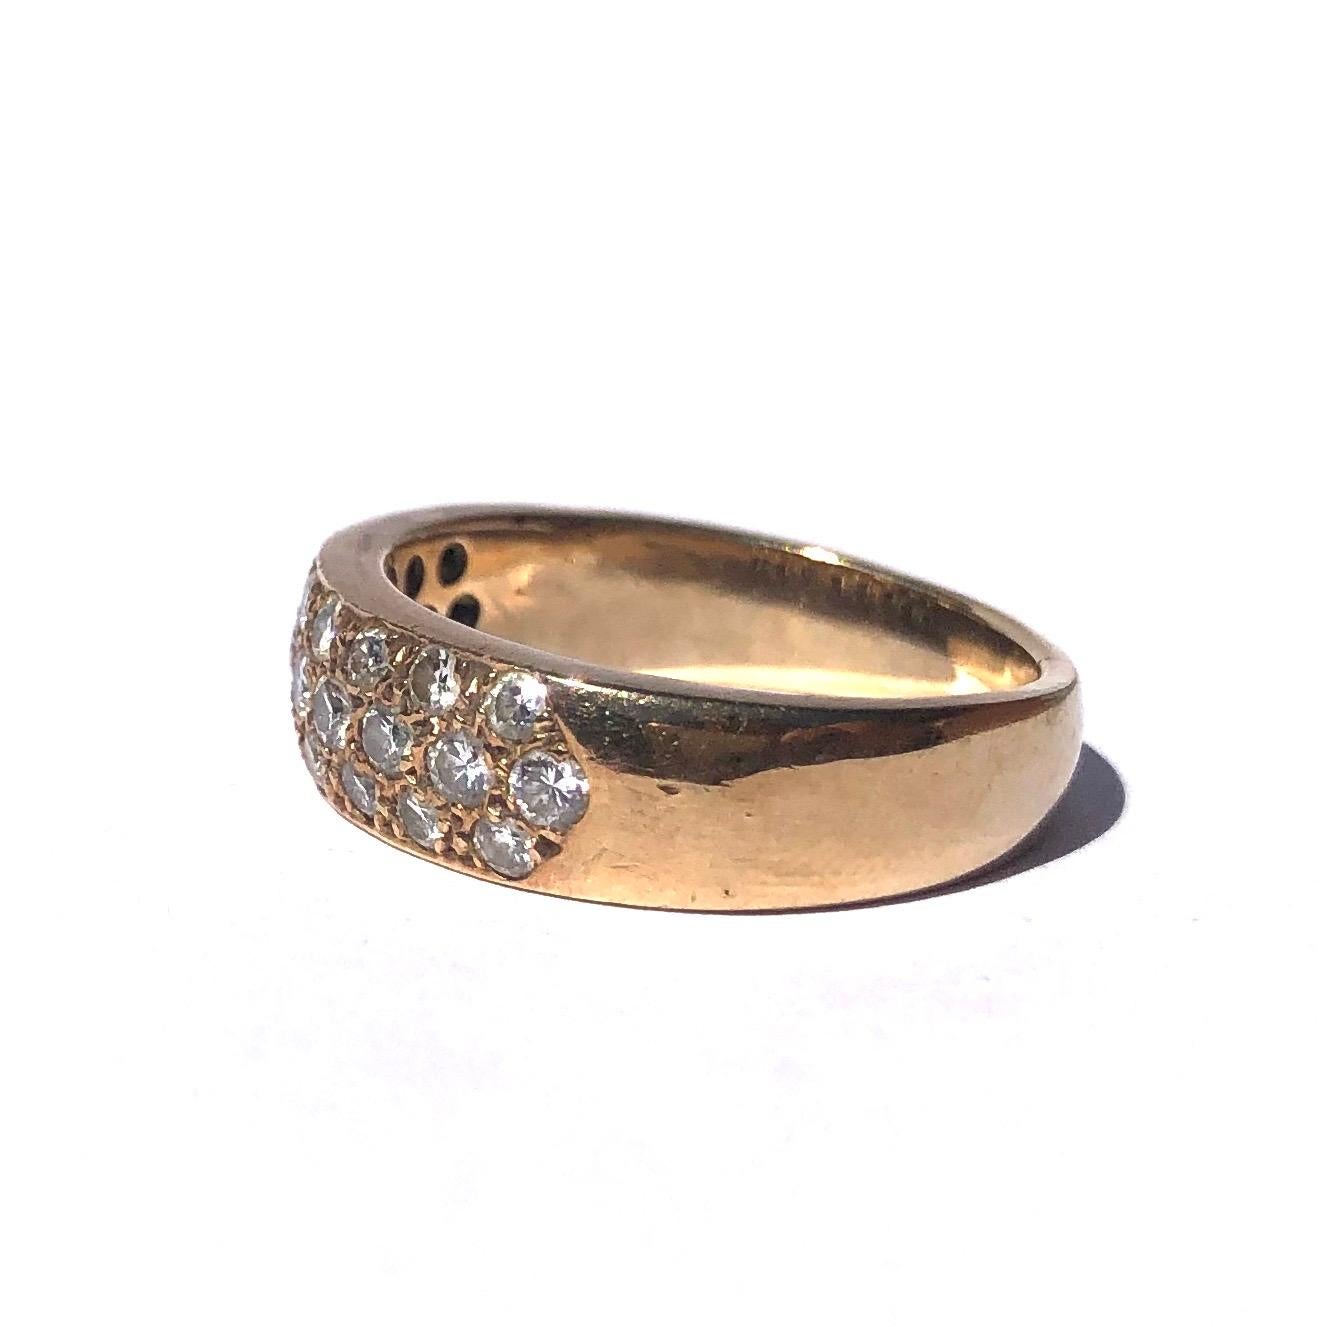 This gorgeous 9ct gold band holds three rows of diamonds. The middle row of diamonds measure 7pts each and the rows either side measure 5pts each. The sparkle is wonderful!

Ring Size: P or 7 3/4 
Band Width: 6.5mm 

Weight: 6.1g